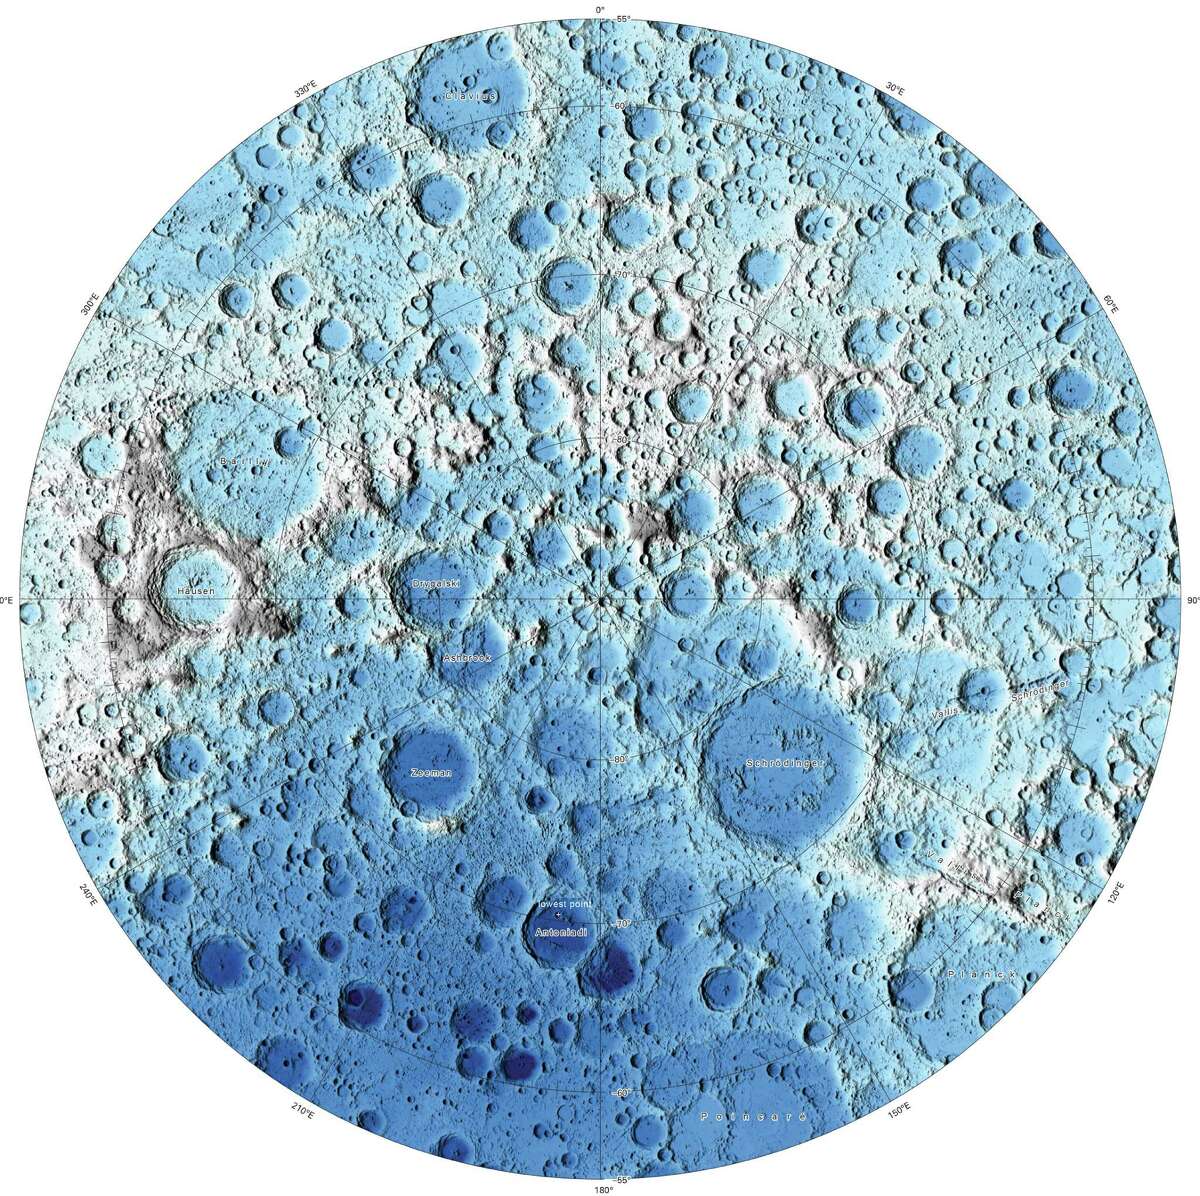 This image is part of a new series of high resolution images of the moon provided by the U.S. Geological Survey. This map of the moon's south polar region is based on data from the Lunar Orbiter Laser Altimeter.